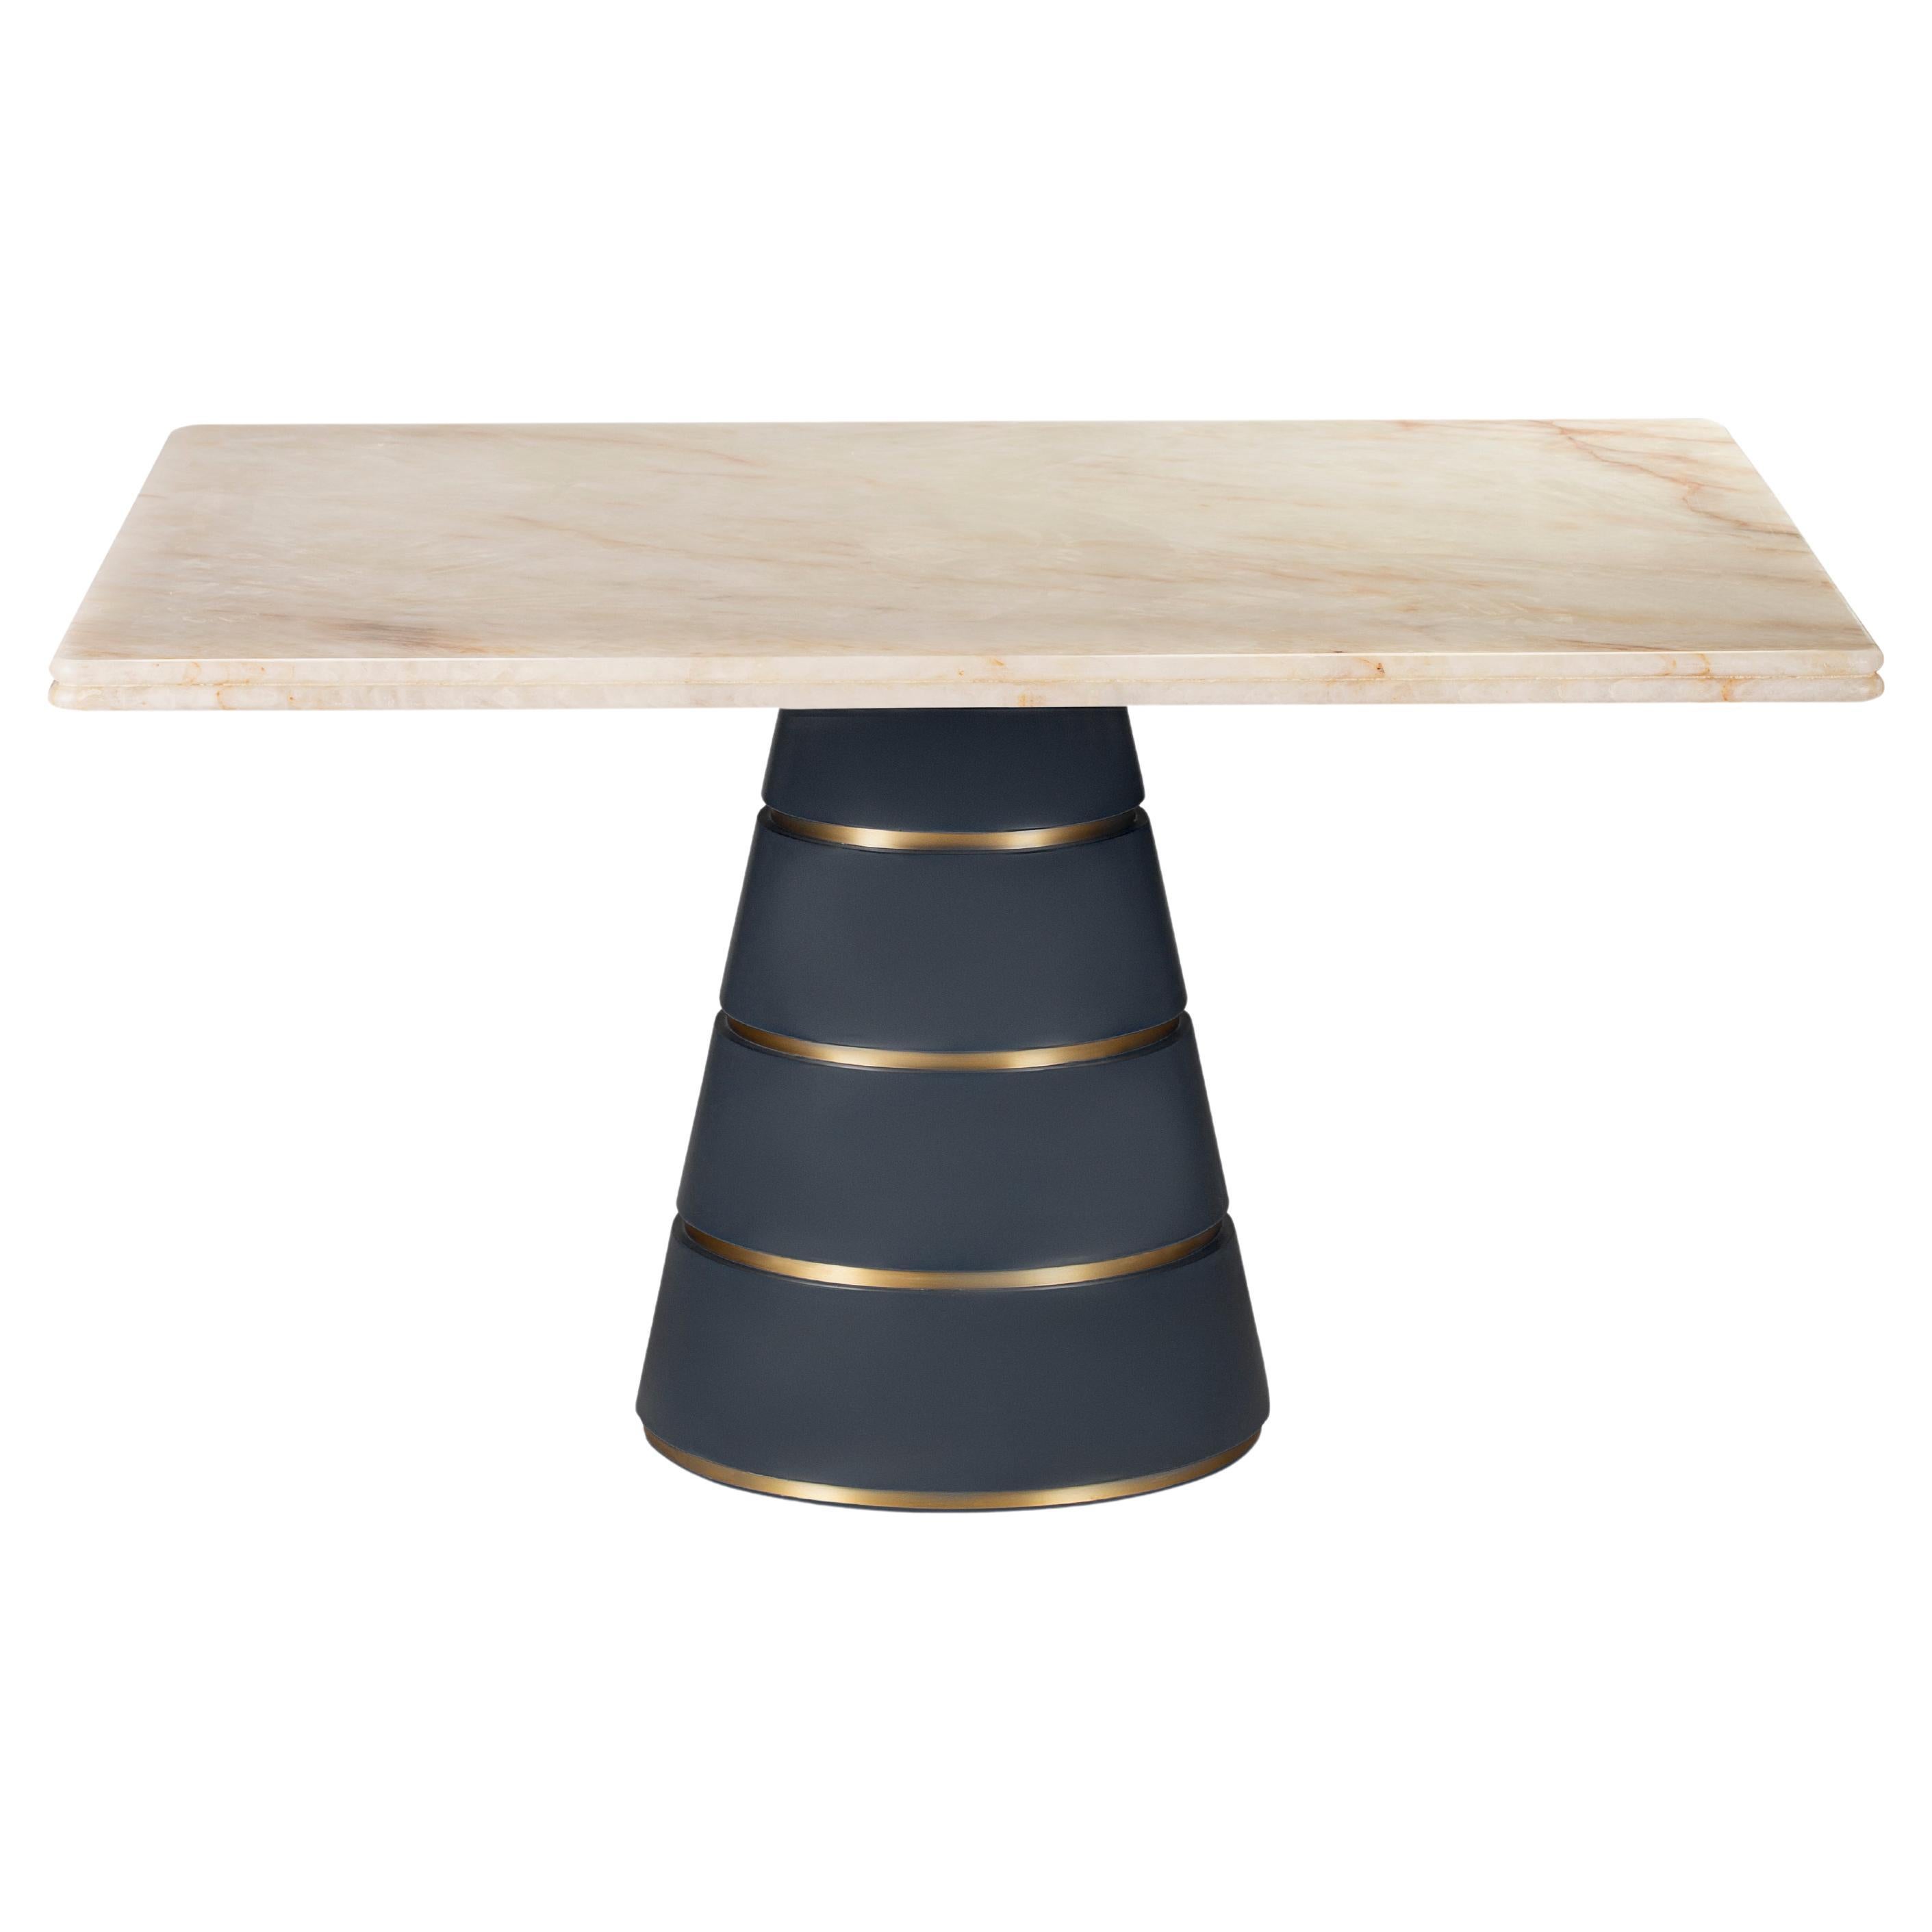 21st Century Vesubio Table, Backlit Quartz Top, Brass, Wood, Made in Italy